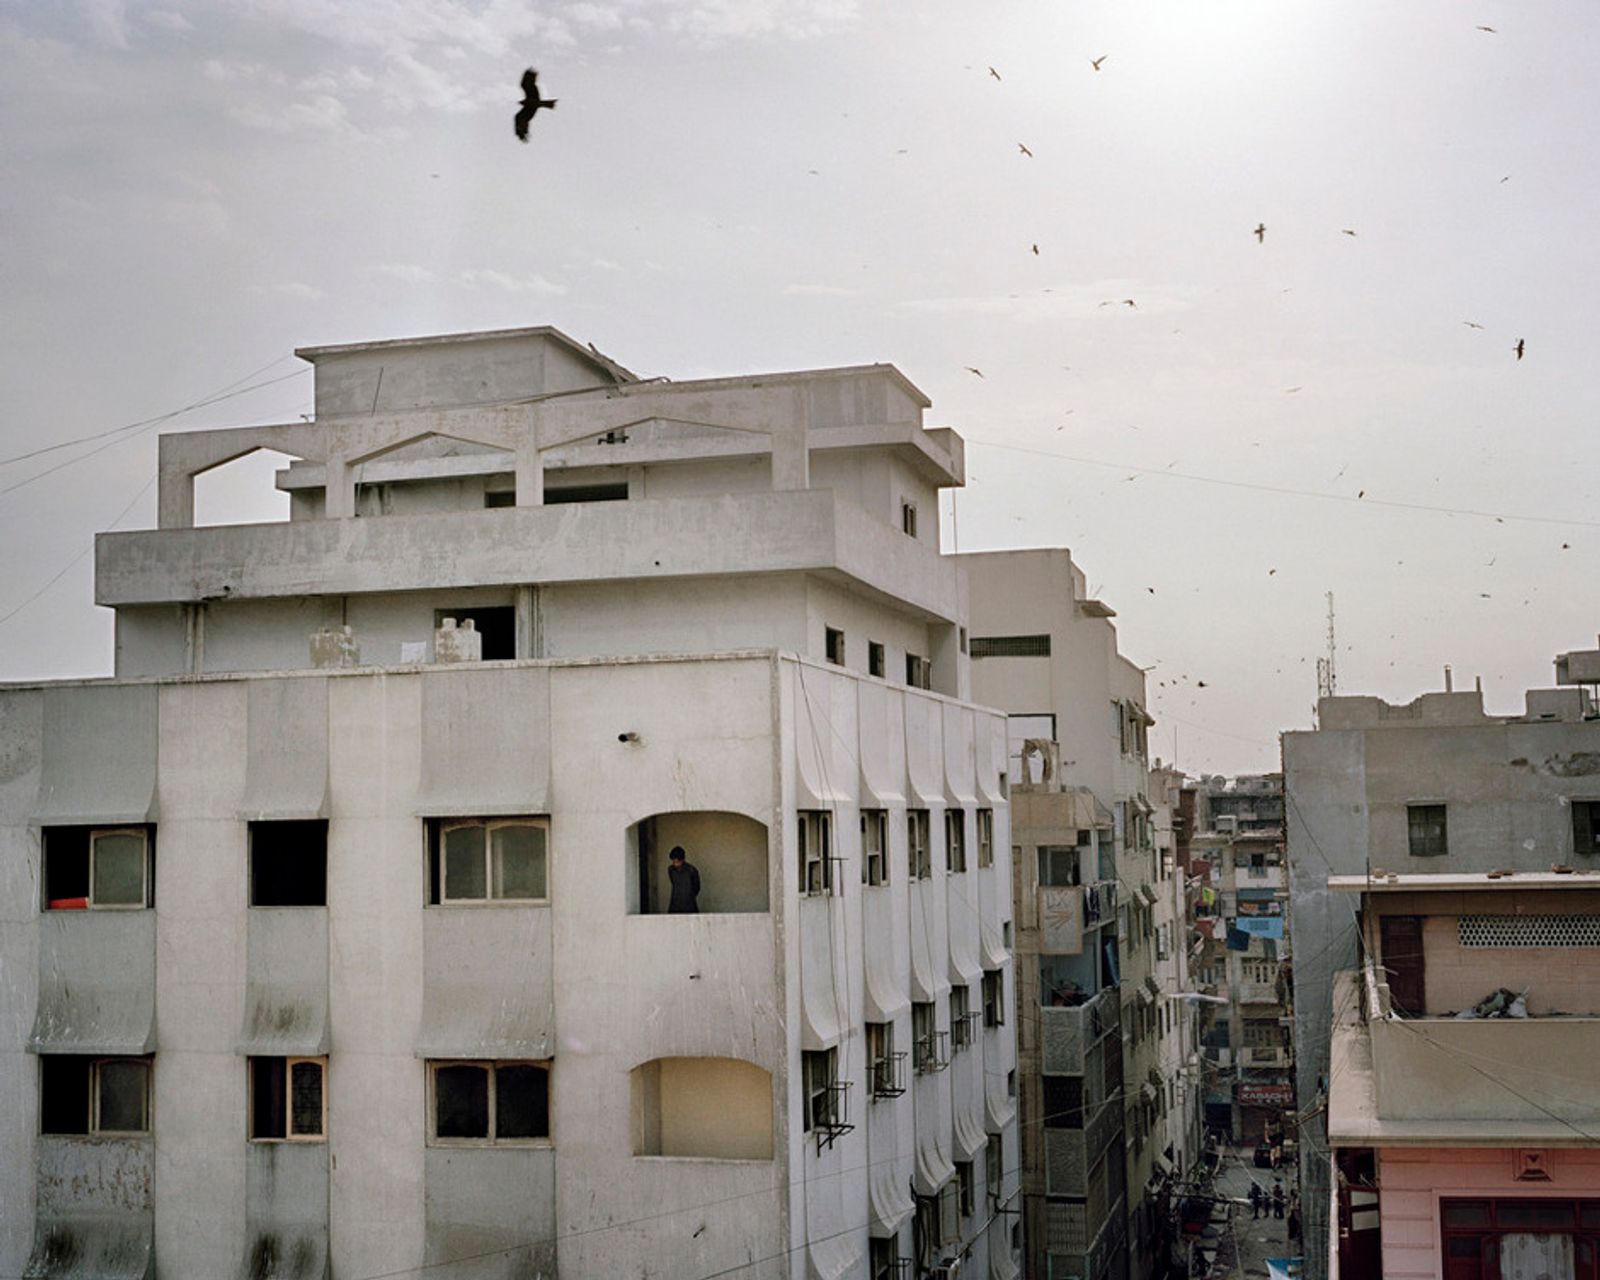 © Valentino Bellini - Image from the Karachi_City of Eagles photography project